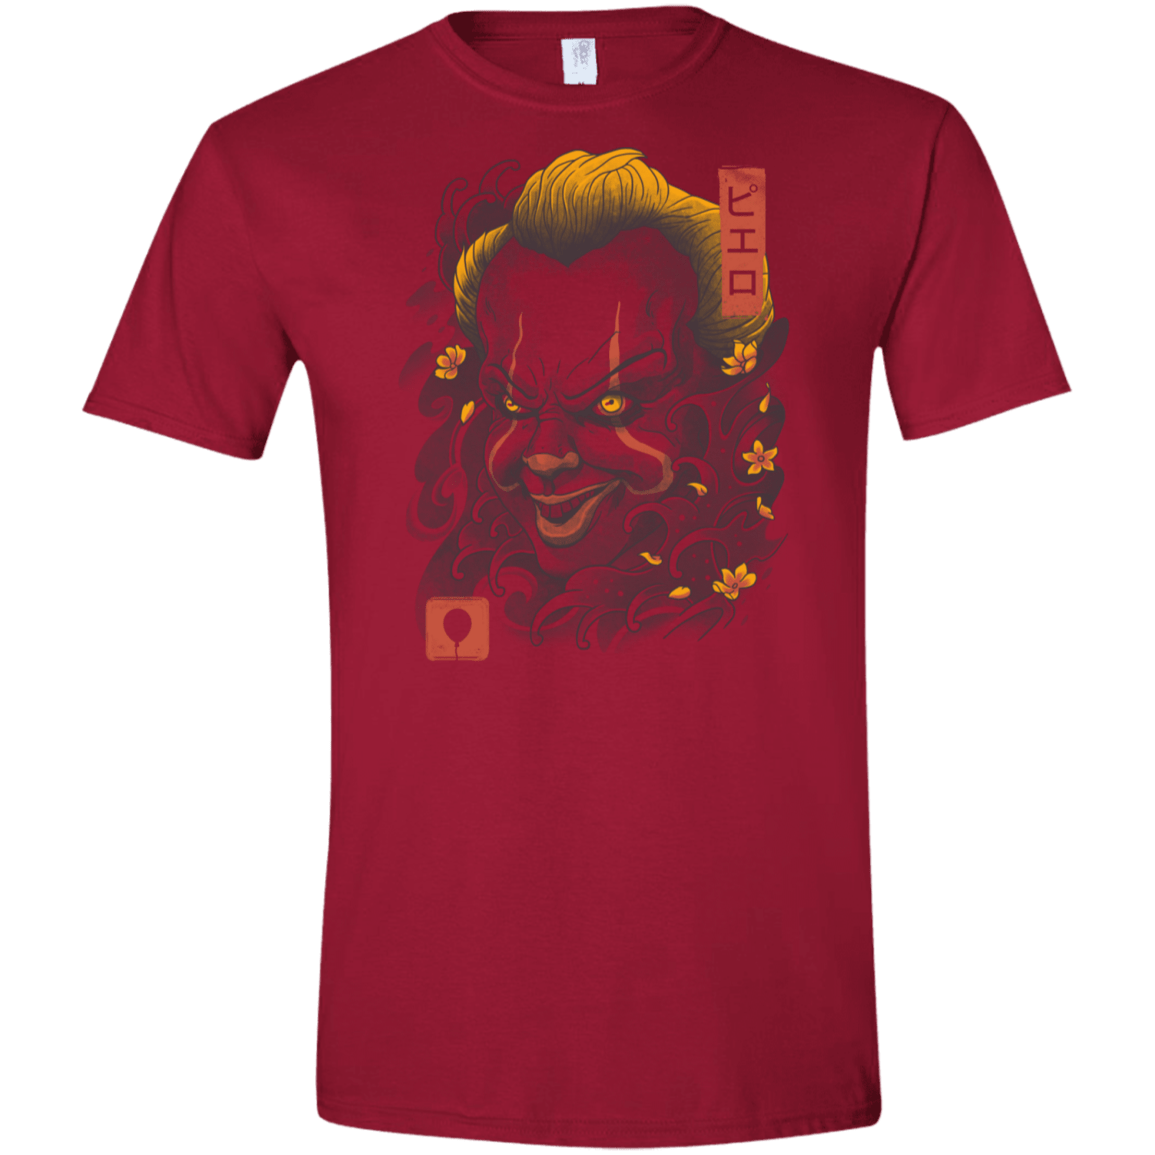 Oni Clown Mask Men's Semi-Fitted Softstyle